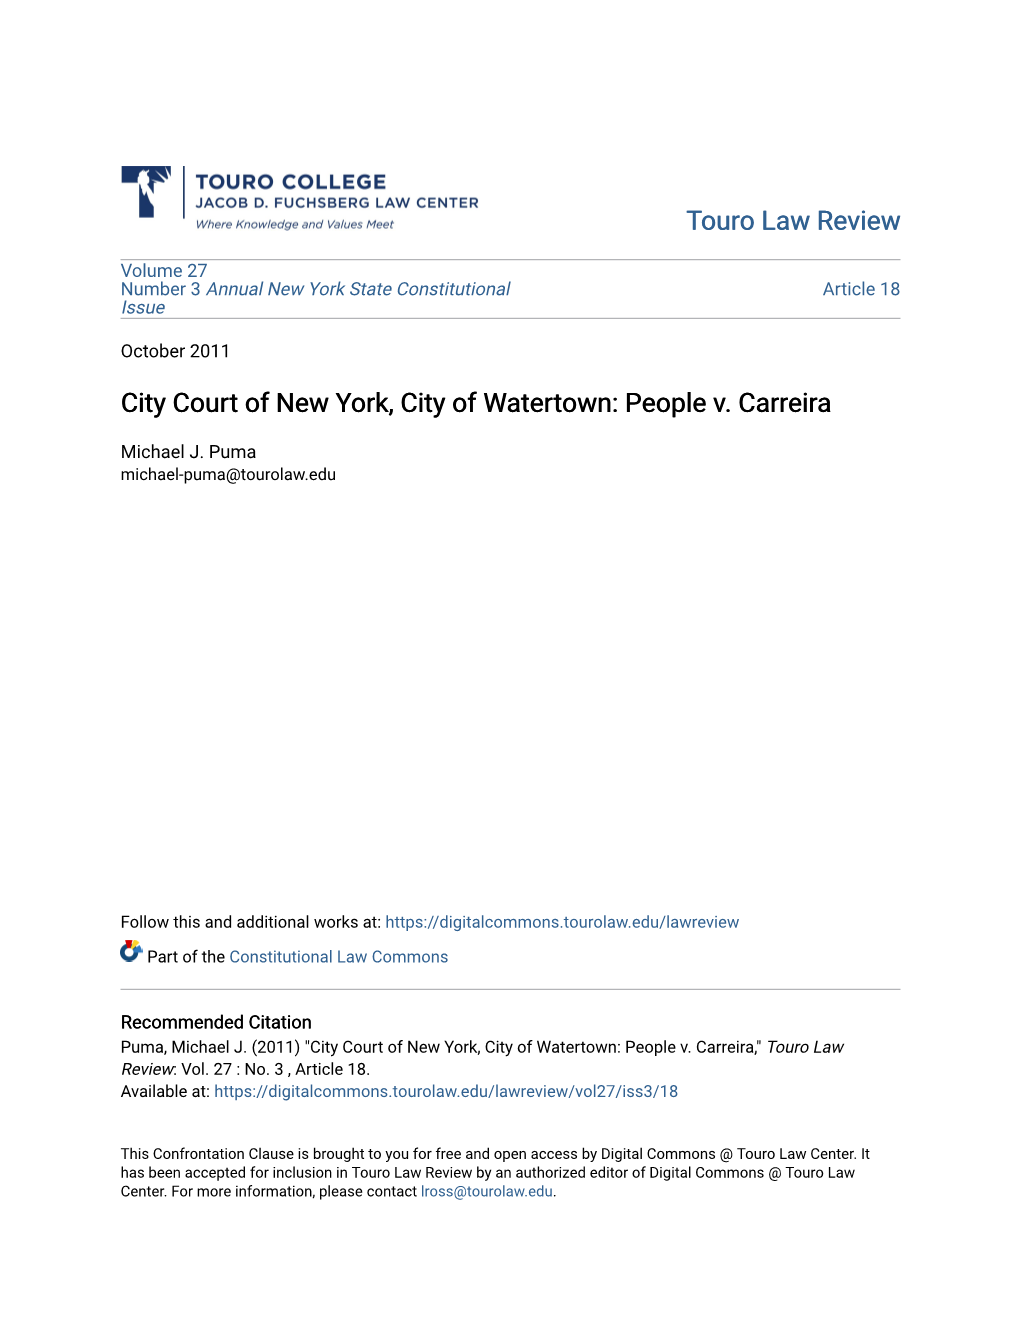 City Court of New York, City of Watertown: People V